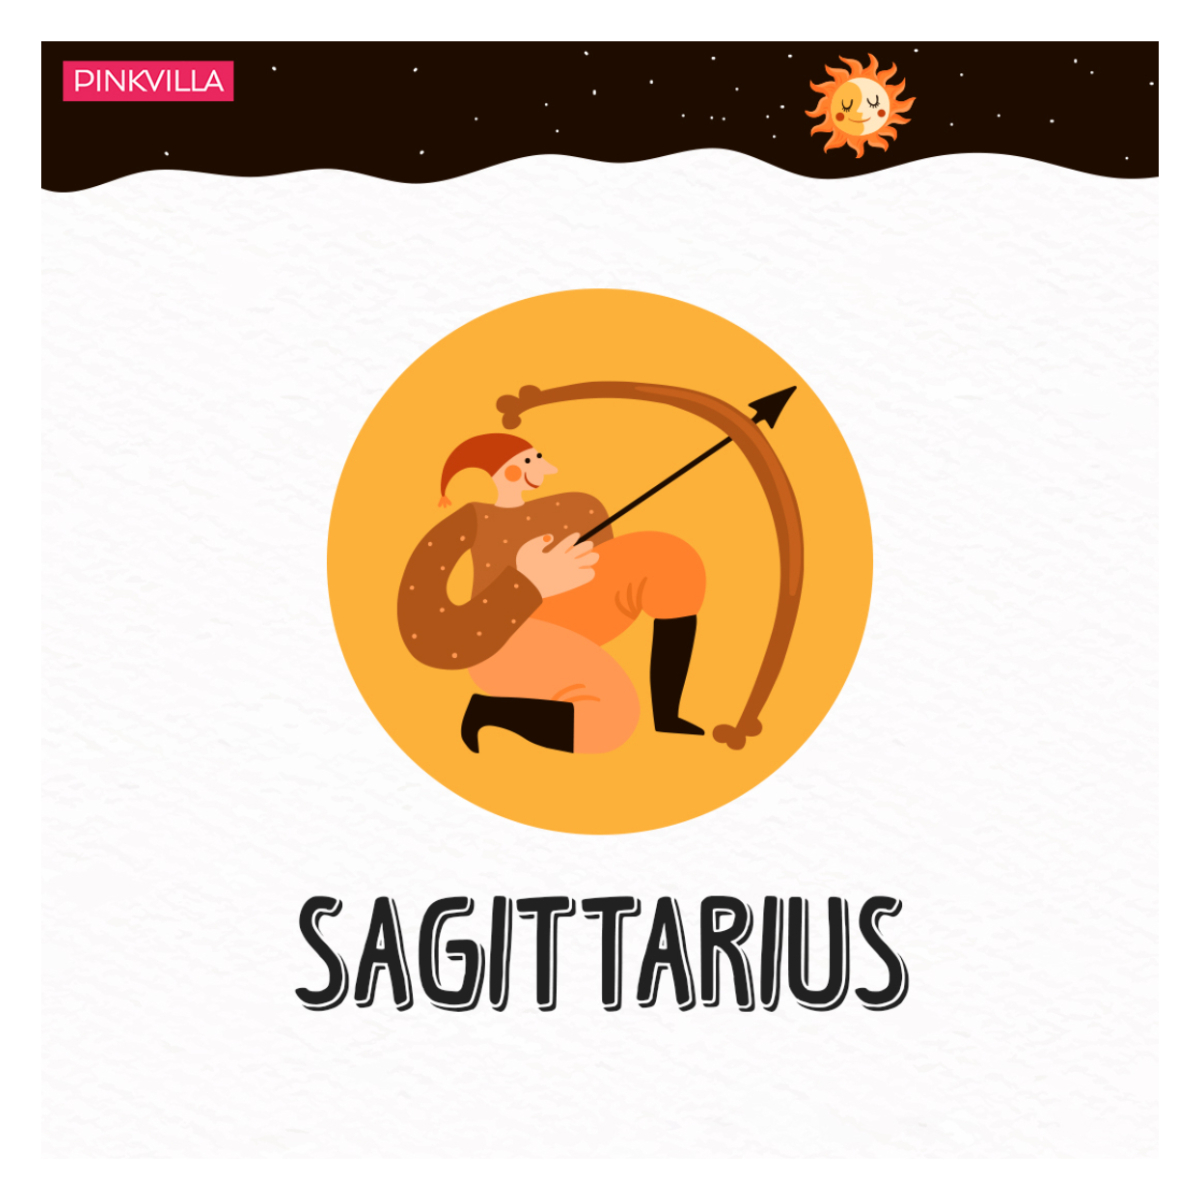 Aquarius to Sagittarius: 4 Zodiac signs who are extremely judgmental